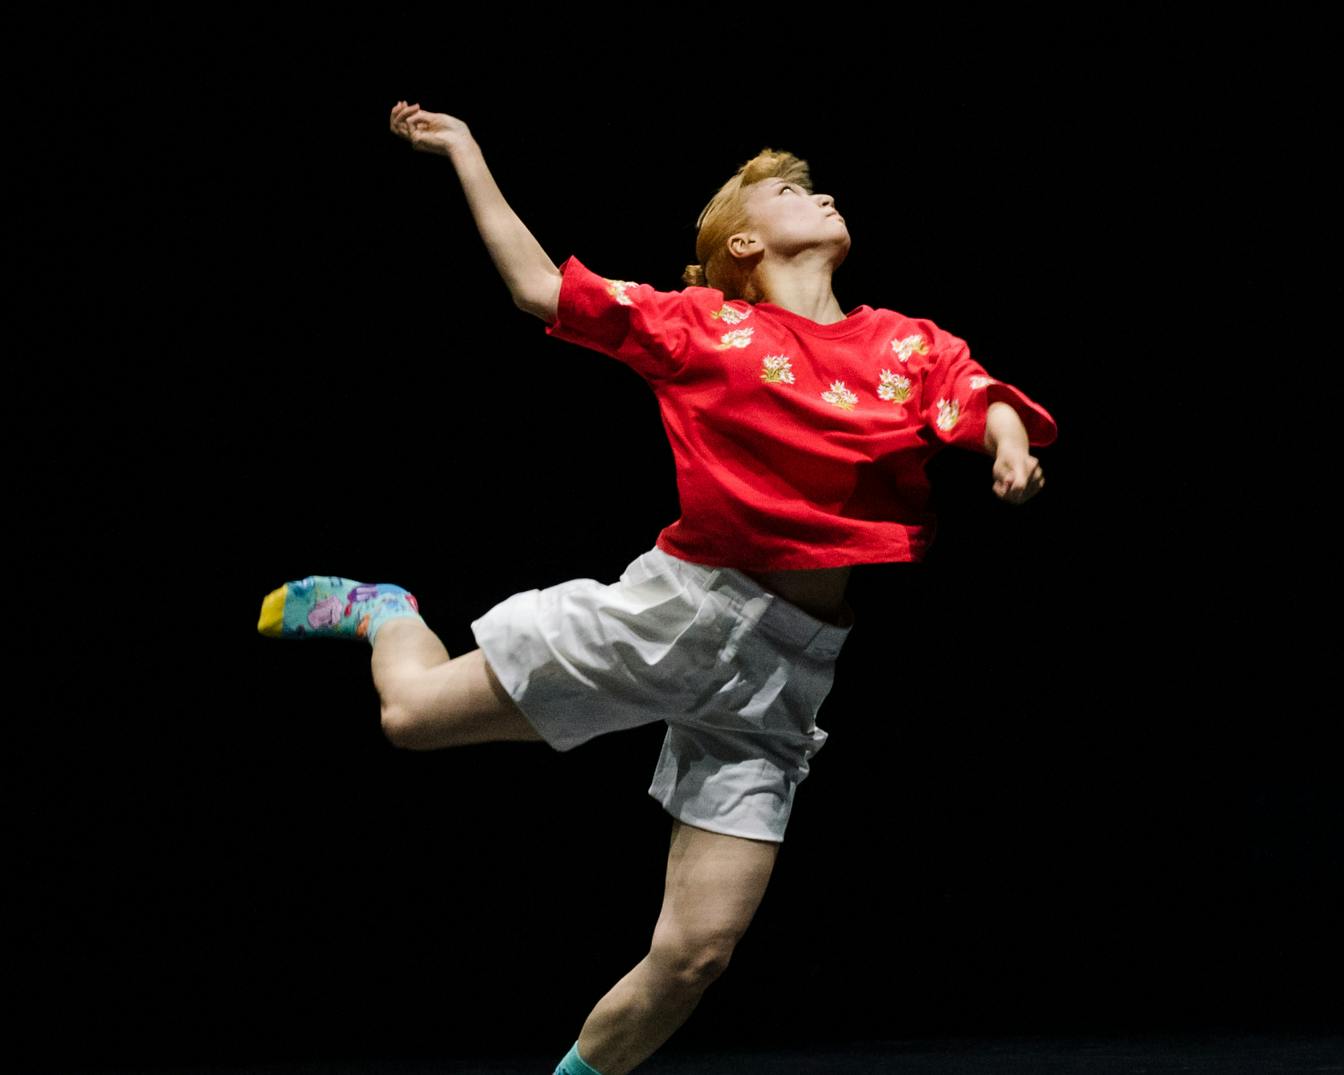 Performer in a red shirt and colorful socks, has the weight only on his left leg and his right arm raised.